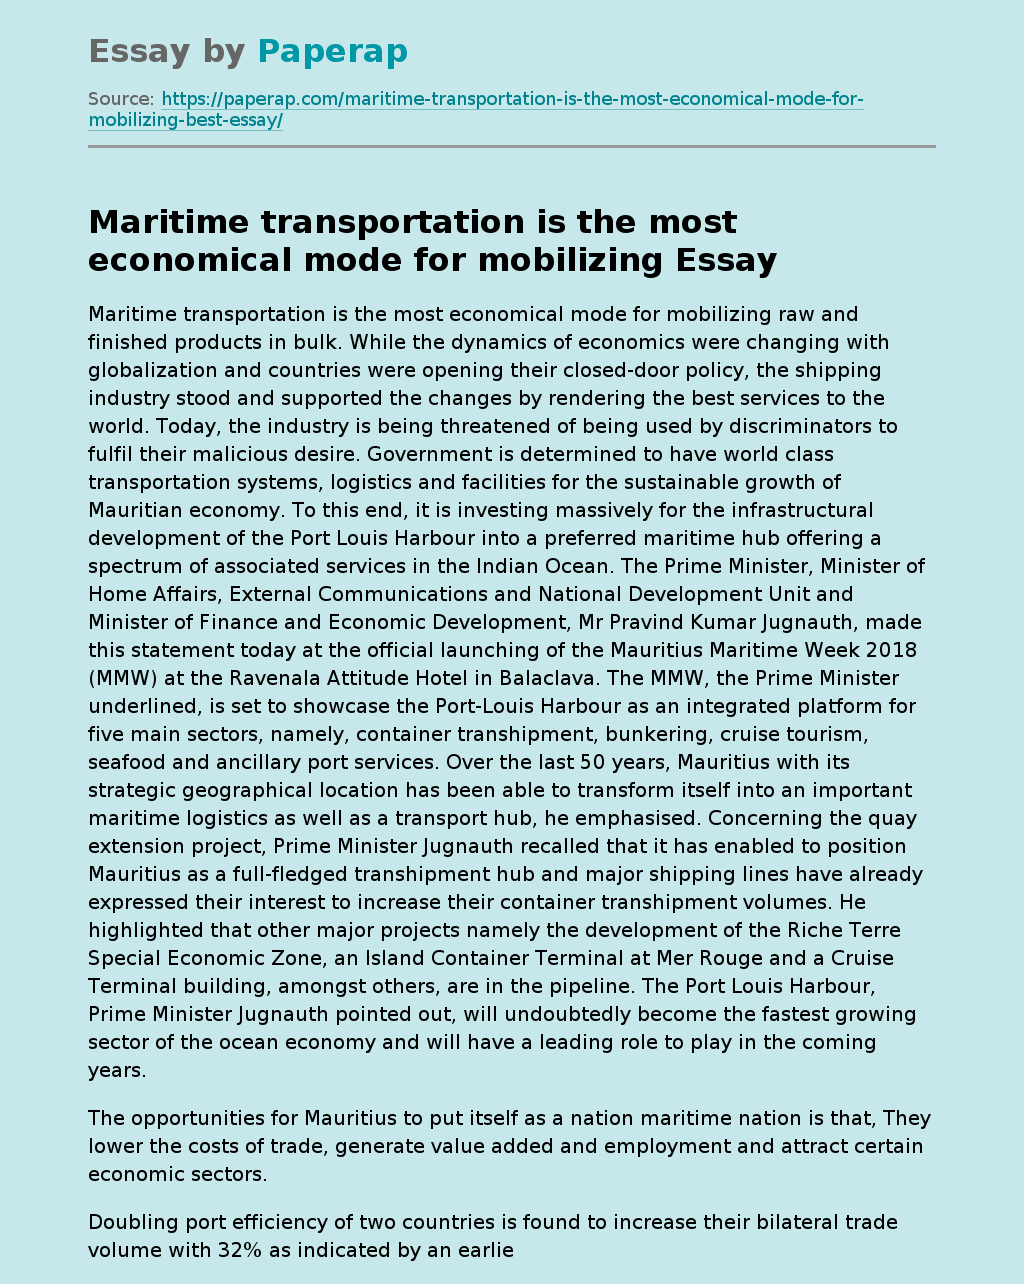 Maritime transportation is the most economical mode for mobilizing